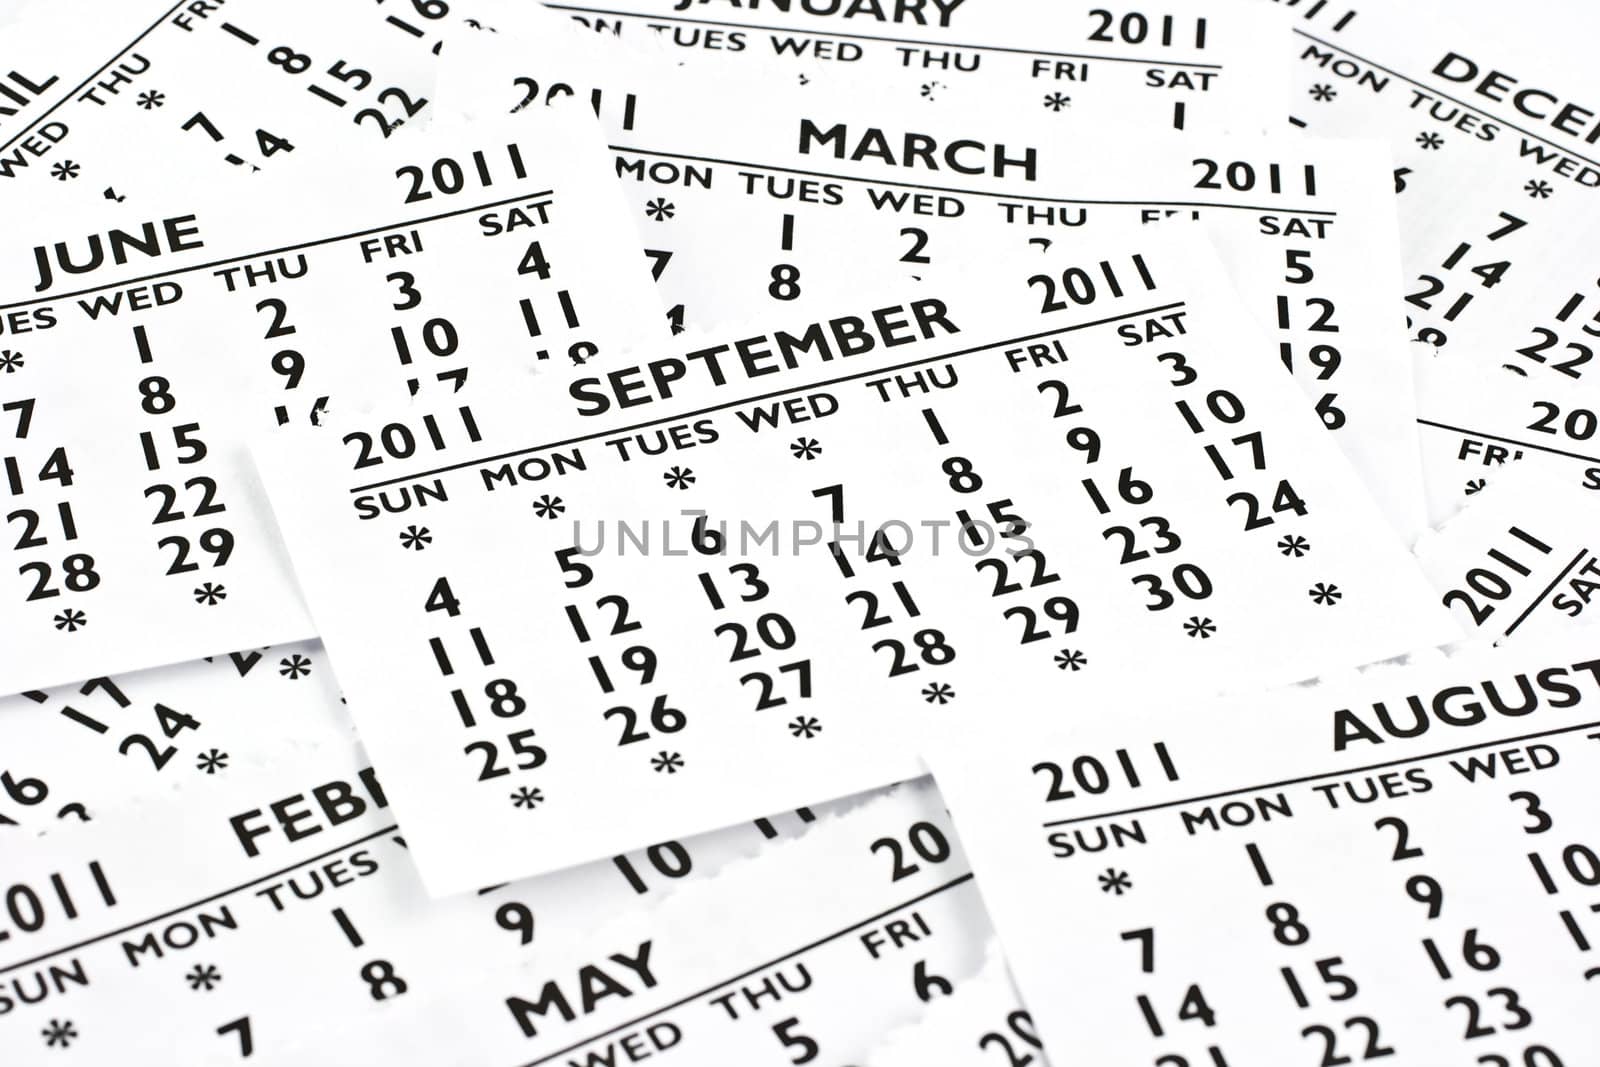 2011 calendar exteriors of the page. Month of September, the site is at the very top.